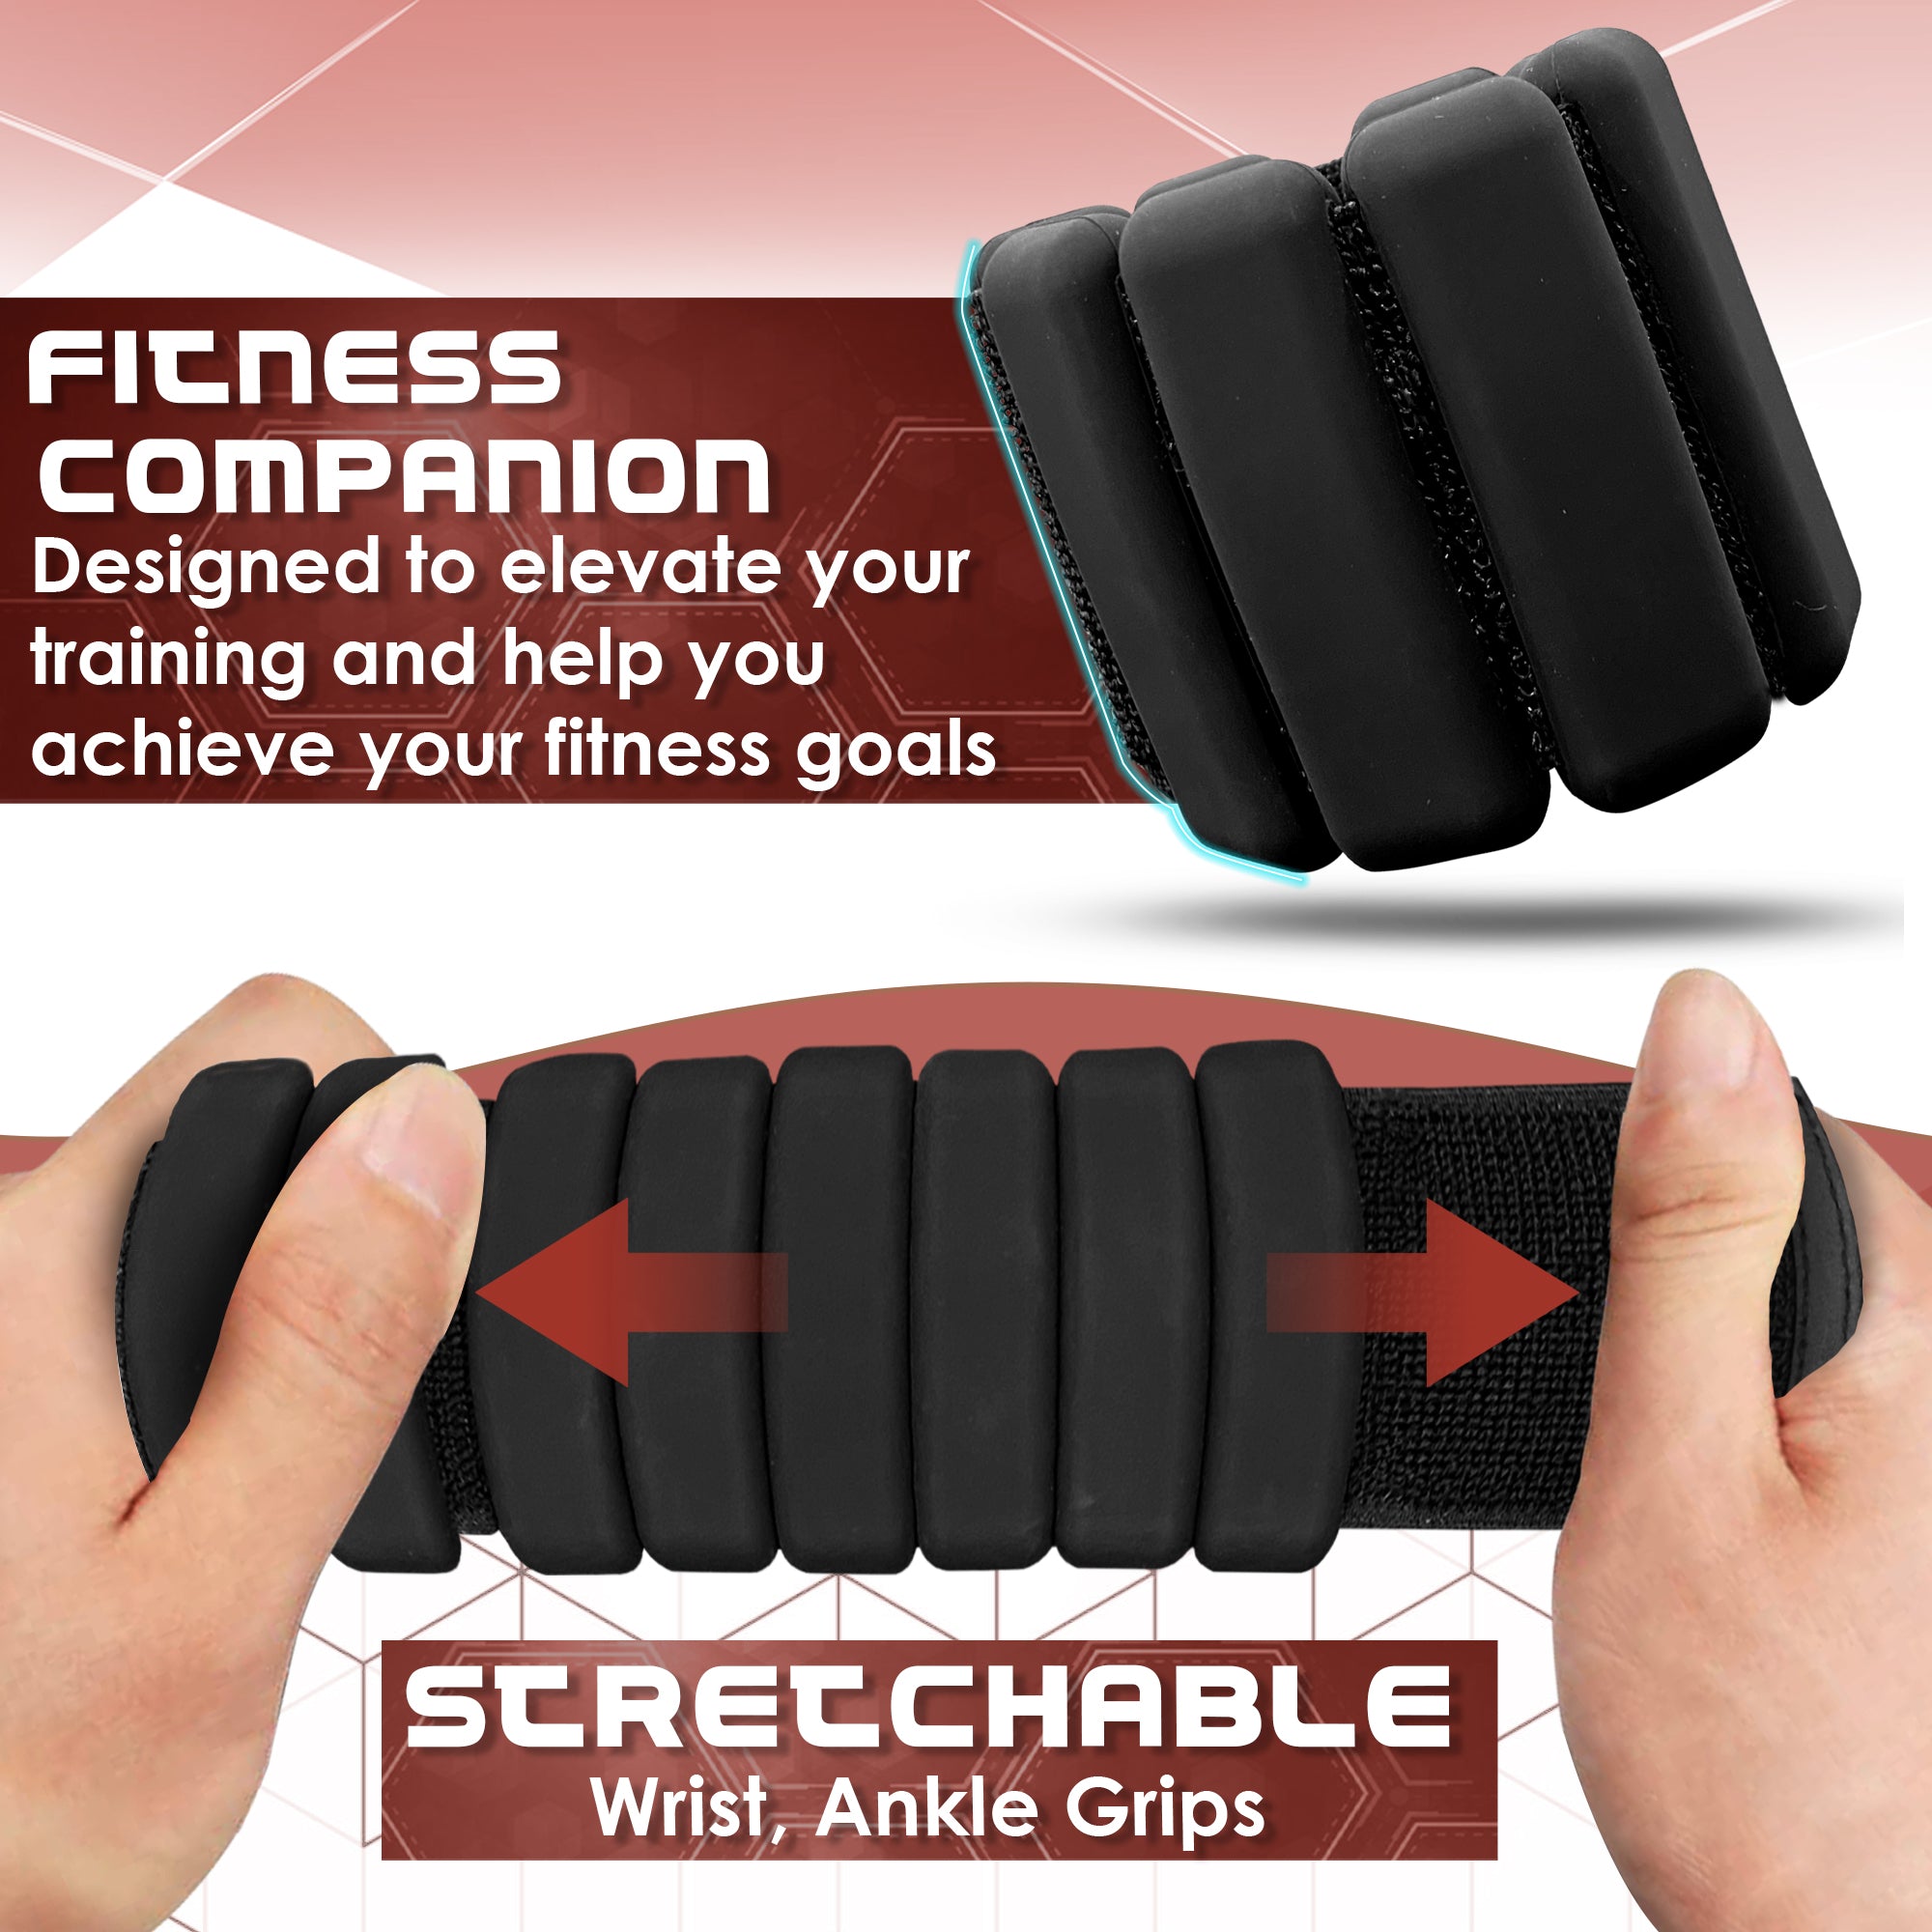 Wrist and Ankle Weights - Set of 2